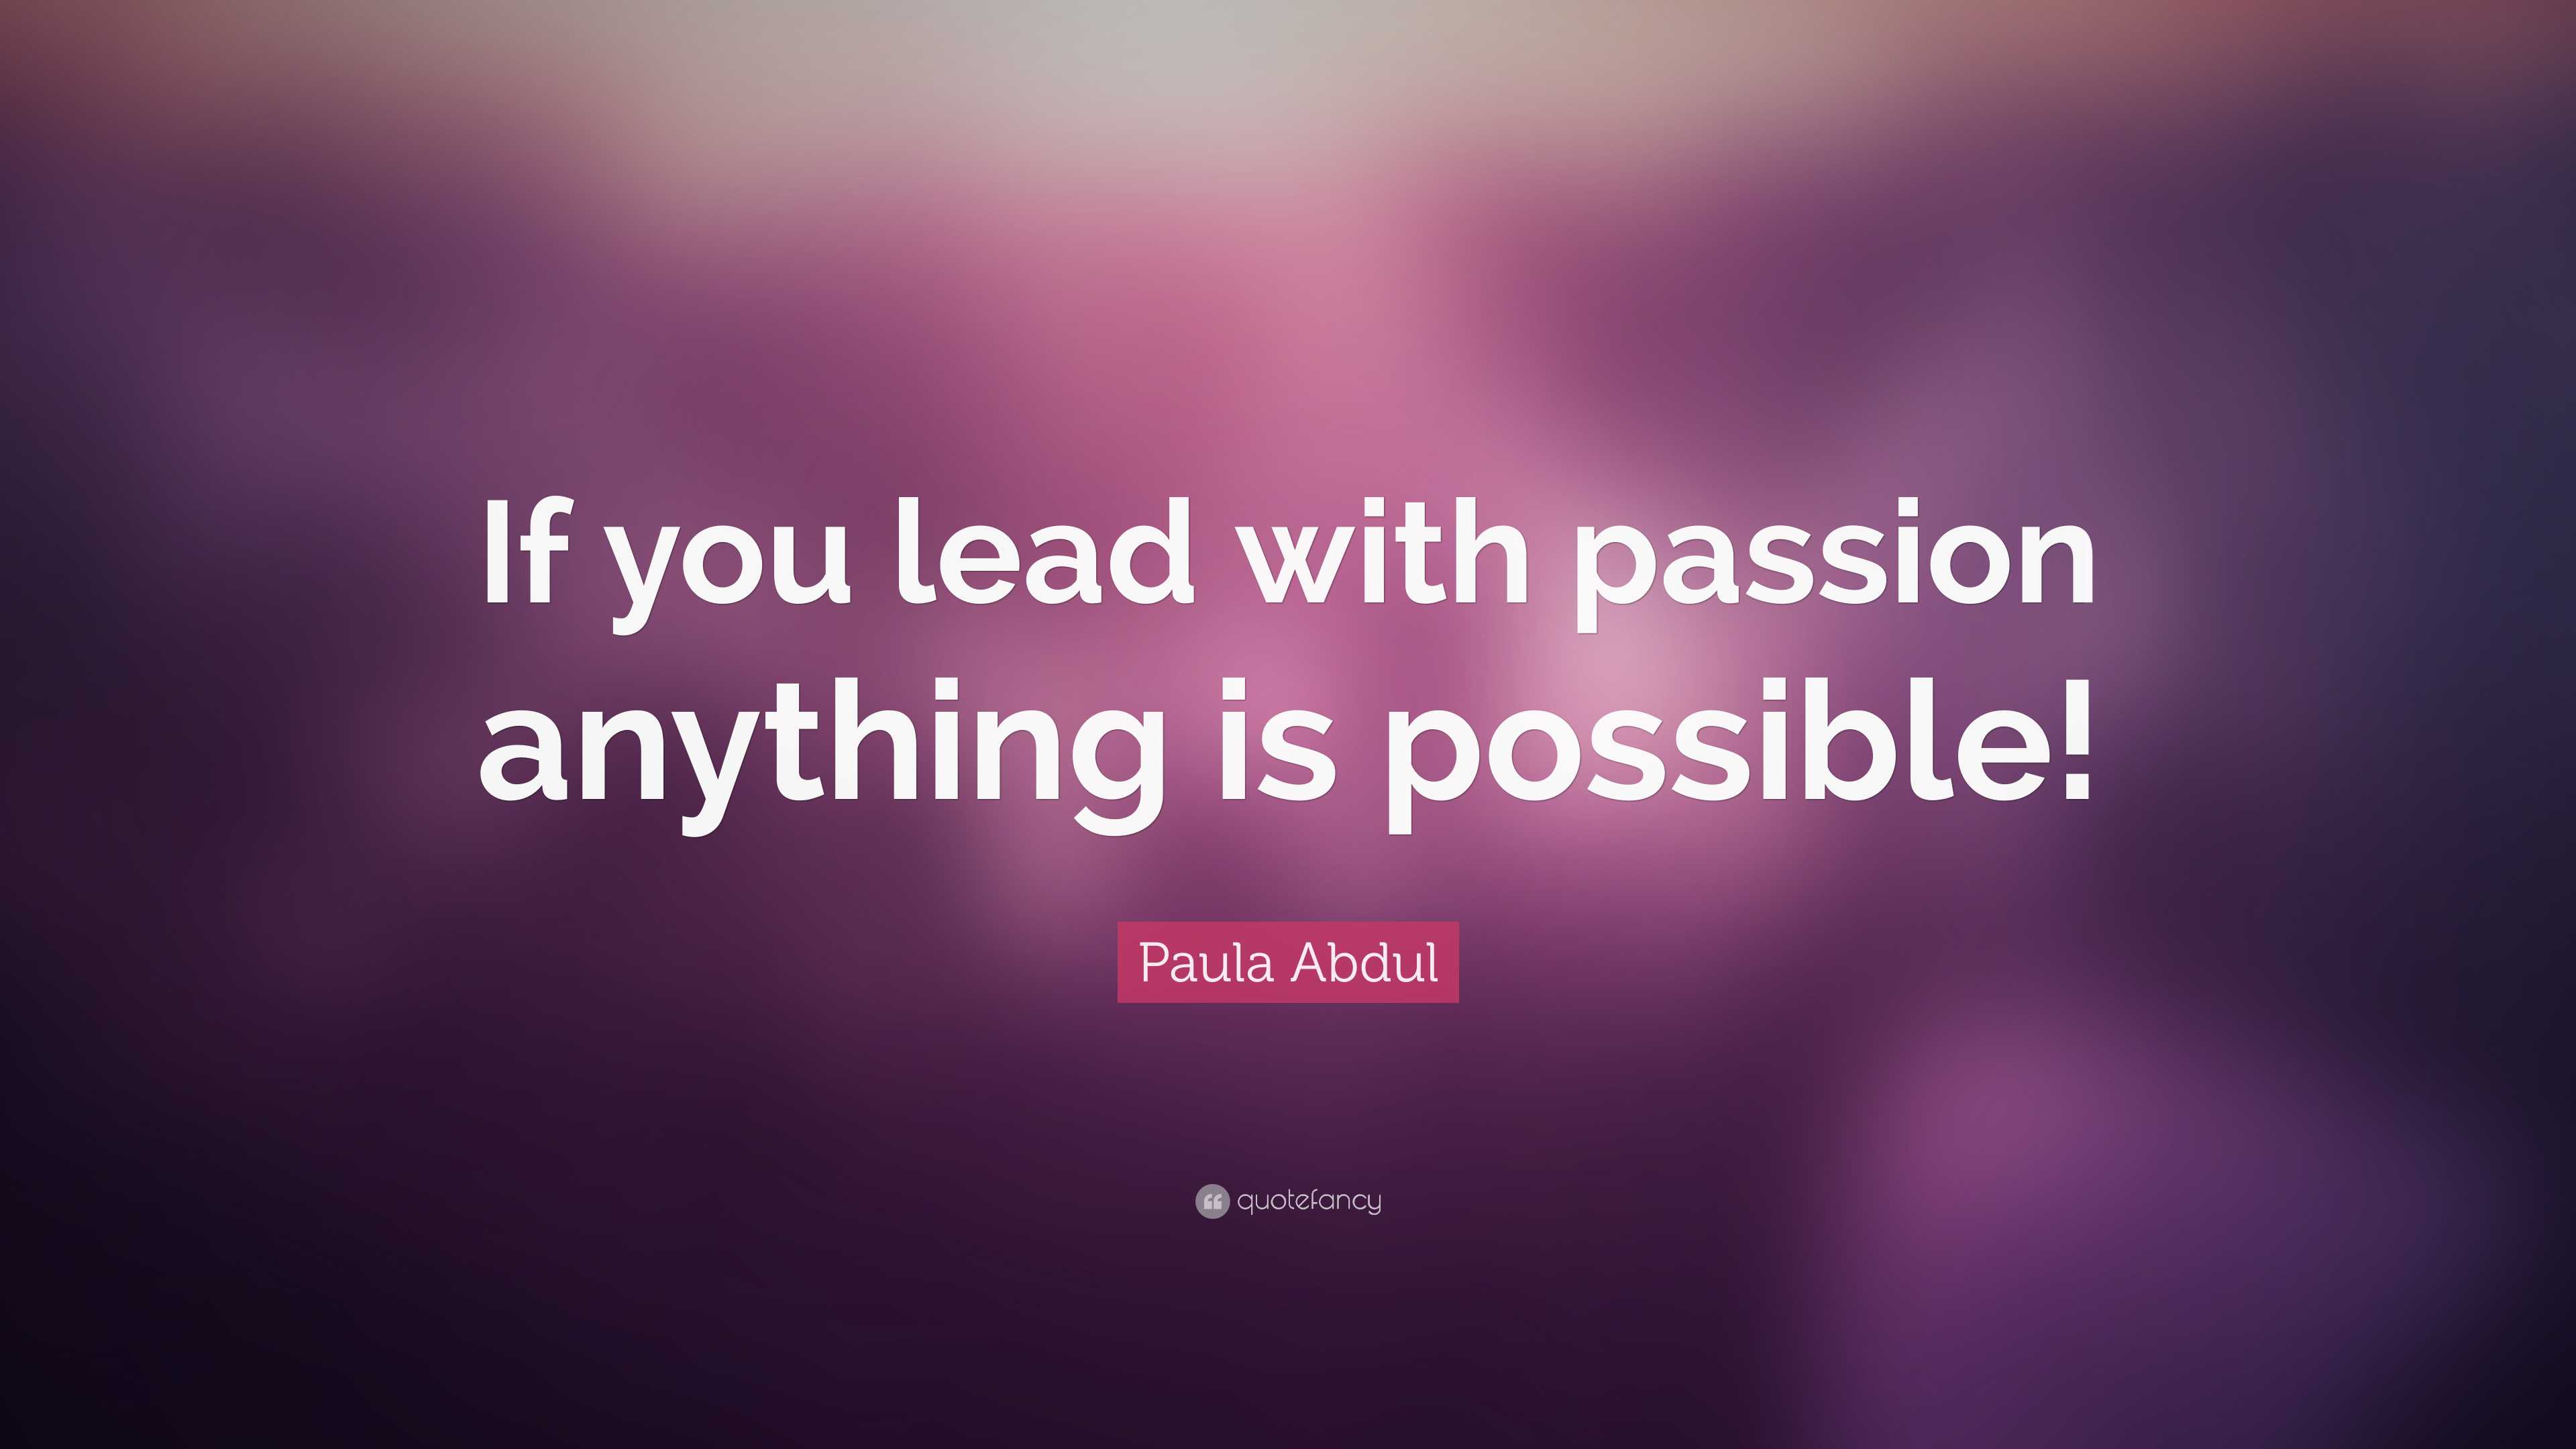 Paula Abdul Quote “if You Lead With Passion Anything Is Possible” 